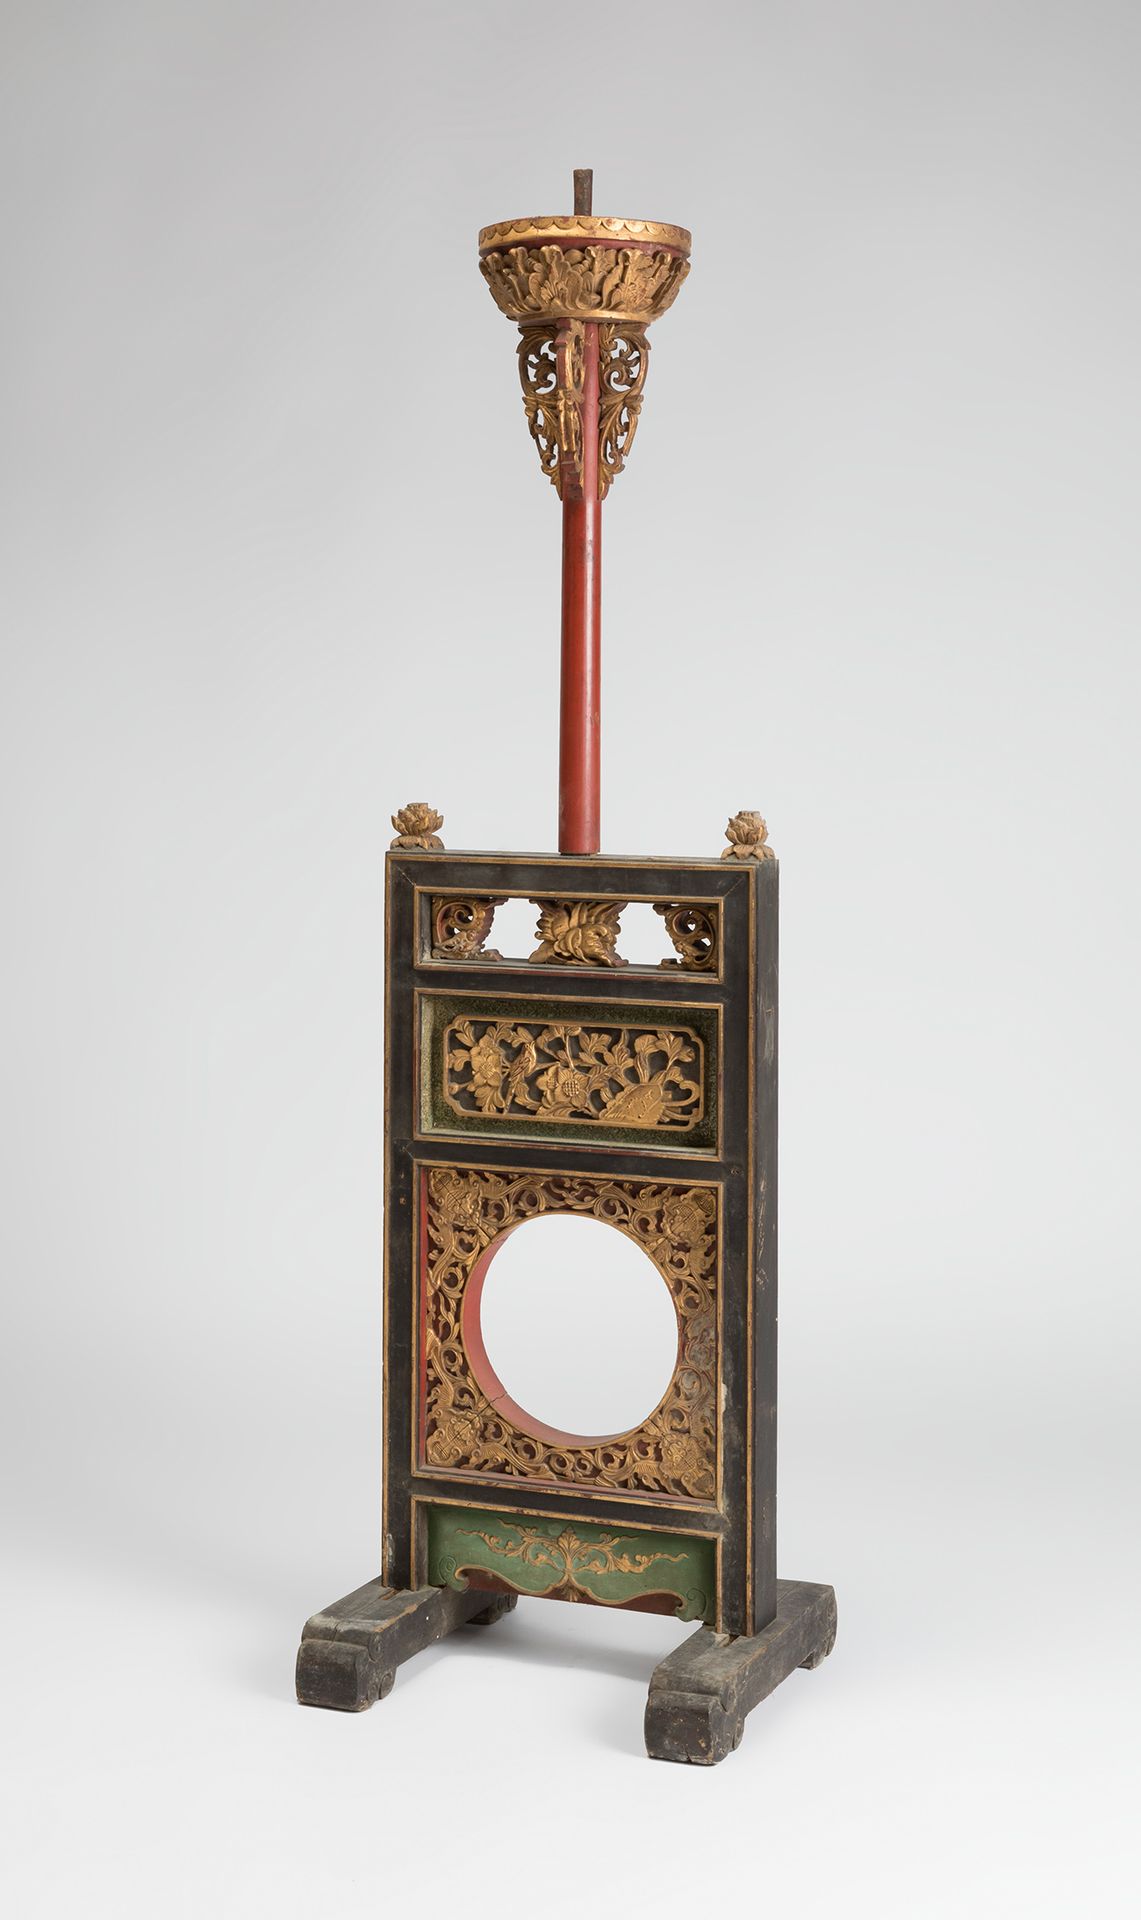 Null Palatial floor lamp. China, late Qing dynasty, 19th century.
Carved polychr&hellip;